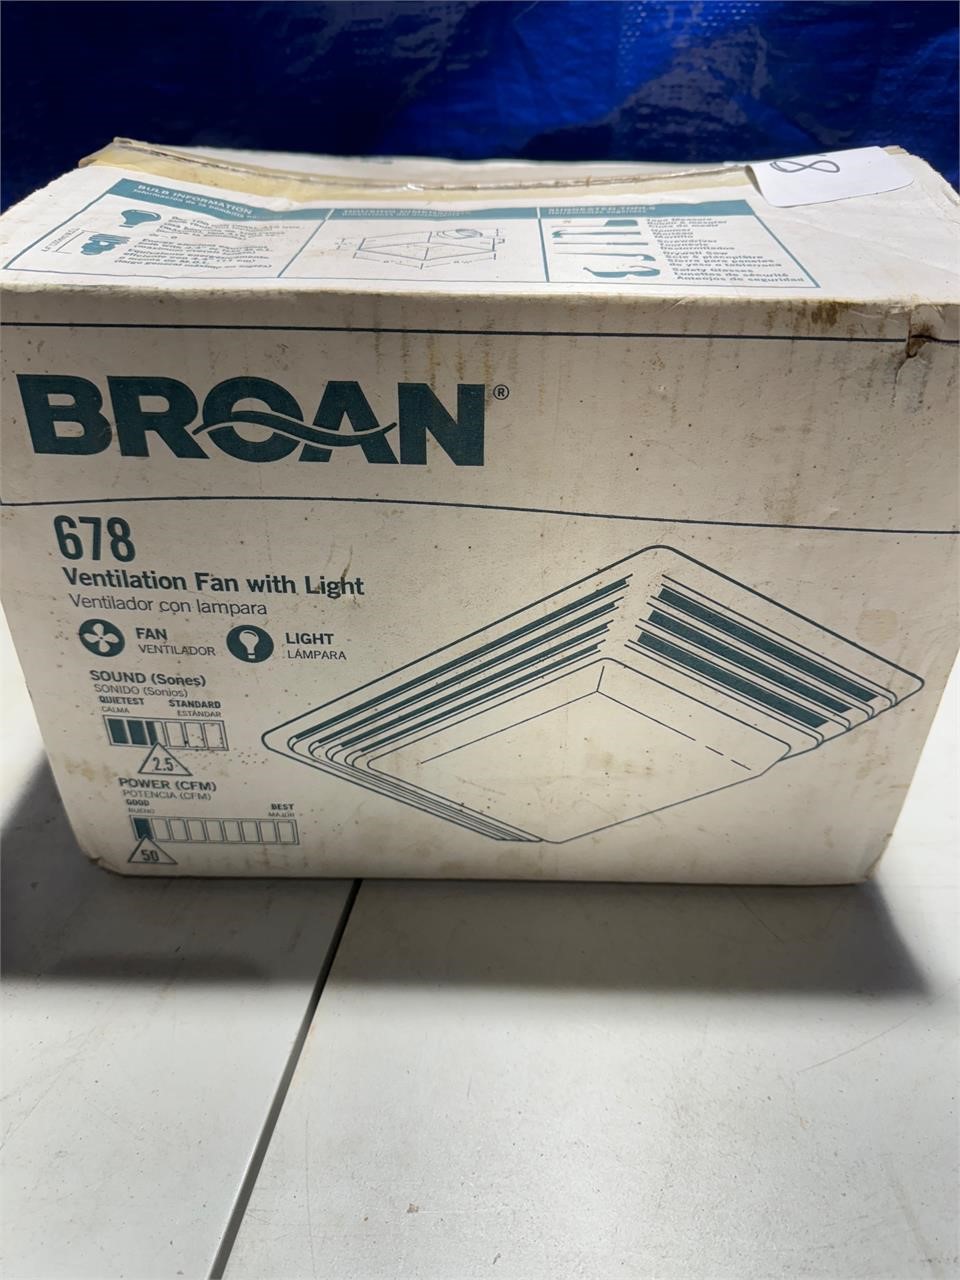 Brian ventilation fan with light